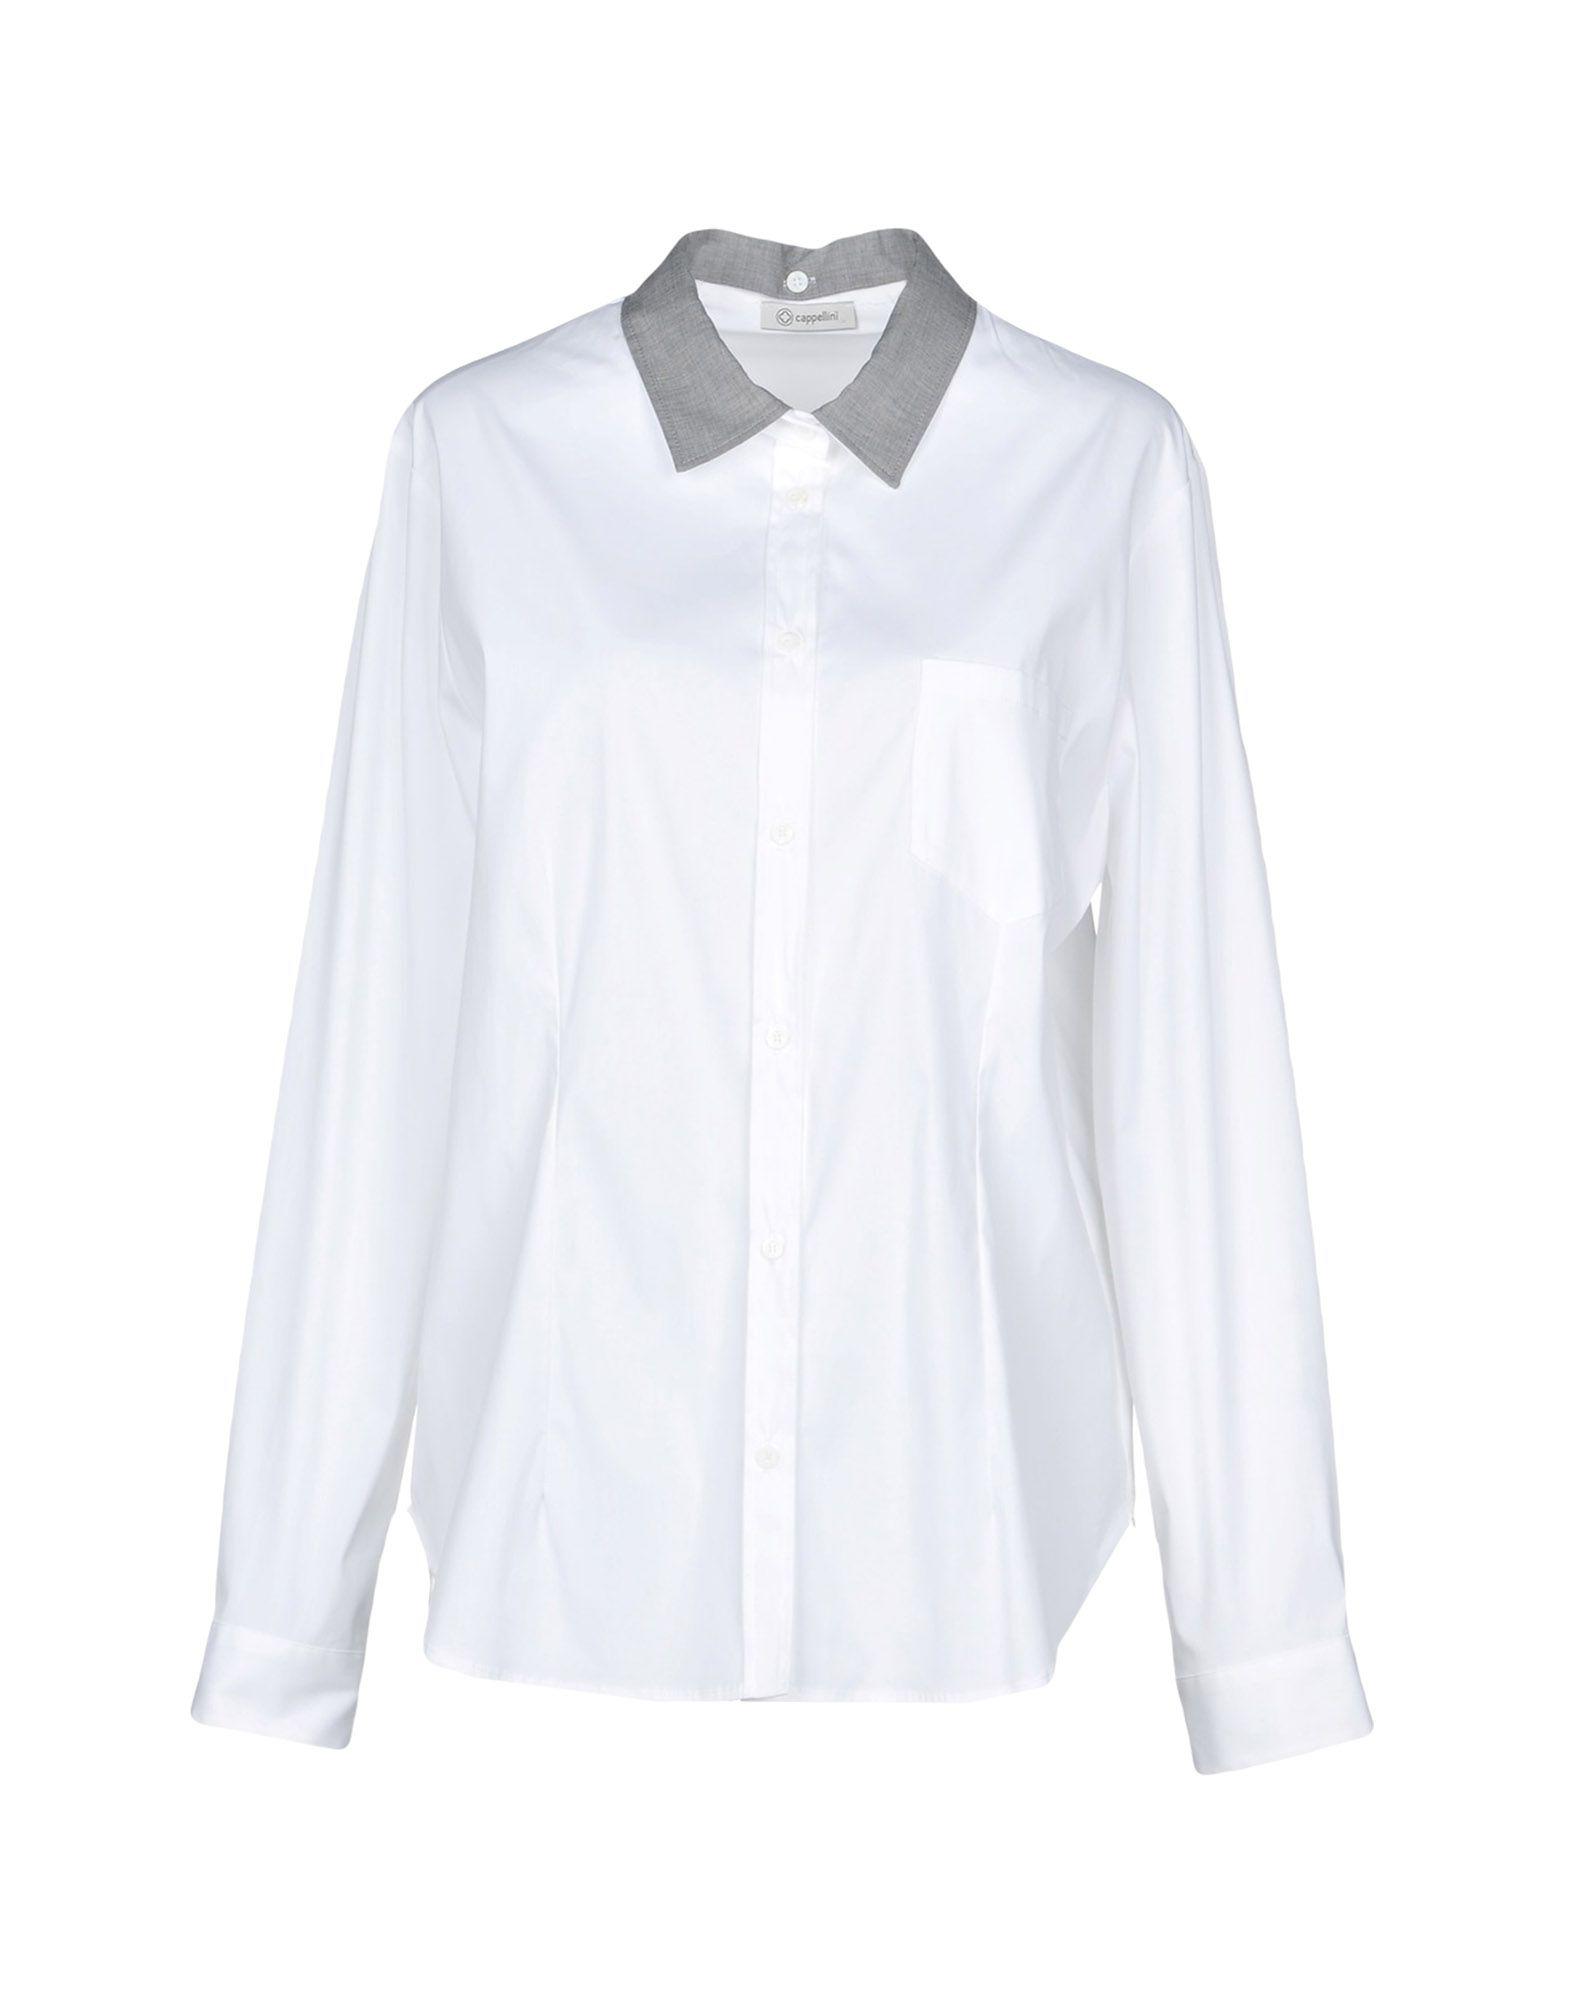 Cappellini By Peserico Cotton Shirt in White - Lyst